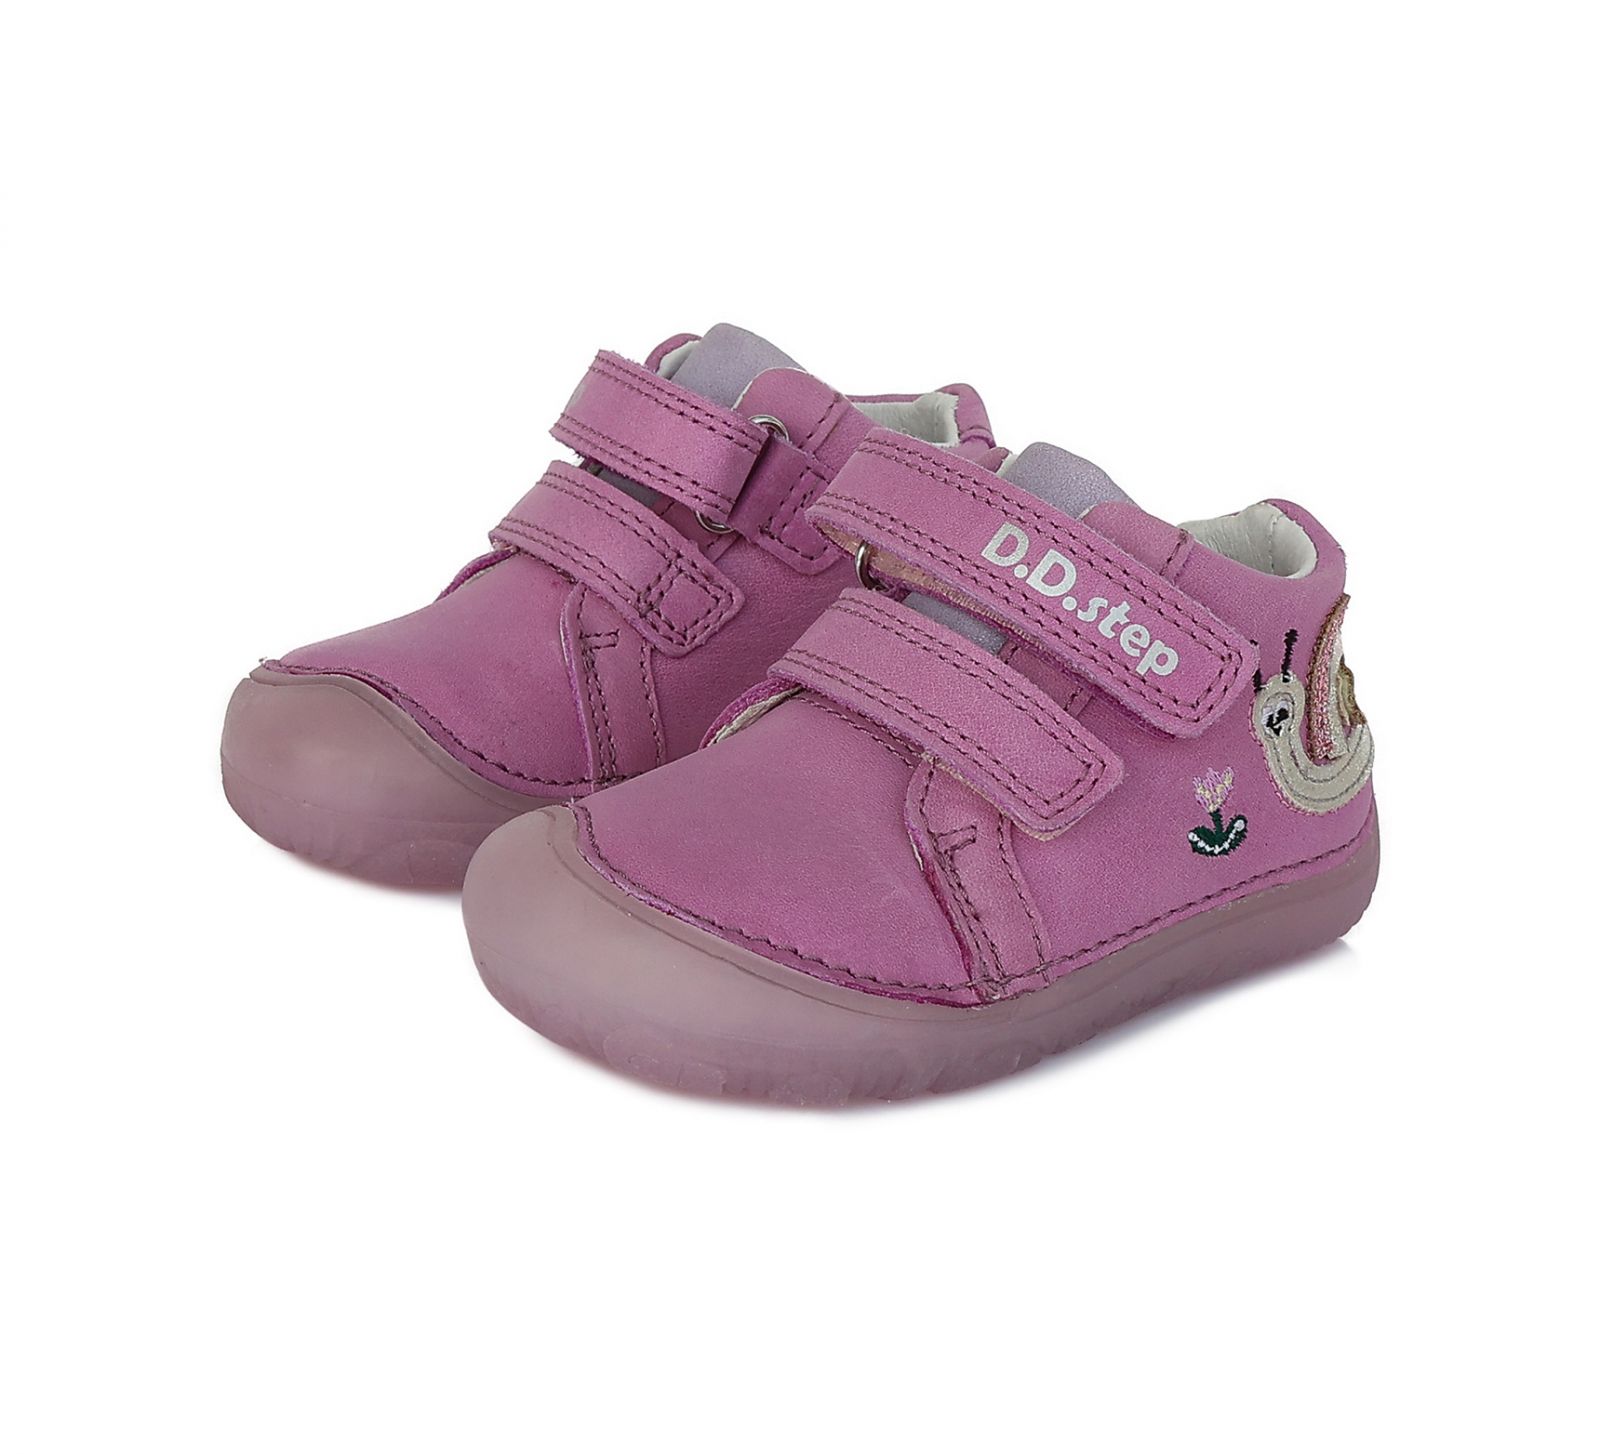 Barefoot DDstep 073 all-year shoes purple - snail